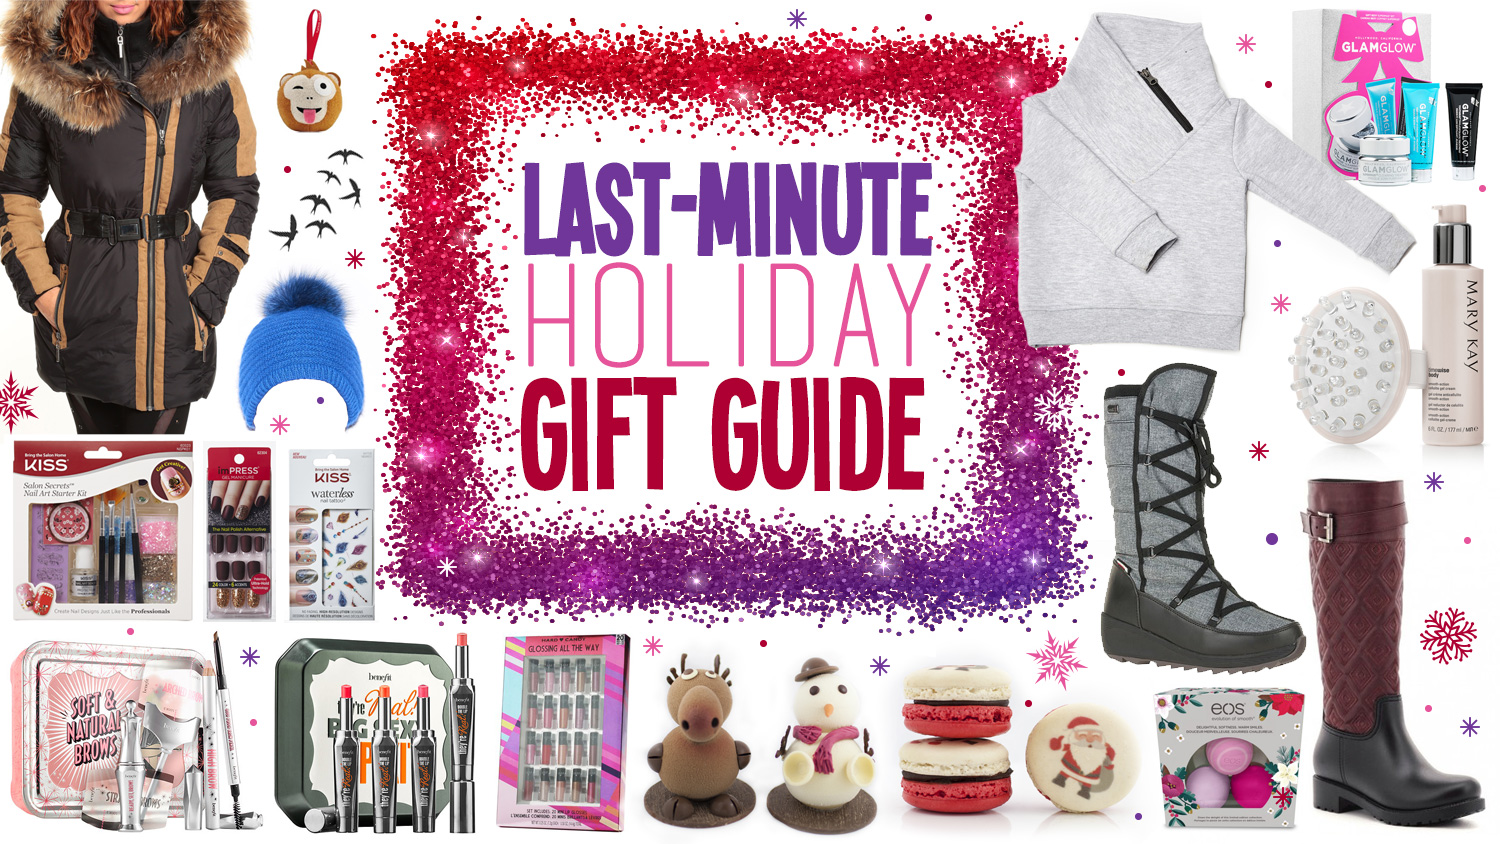 lastminute-Holiday_Gift_Guide